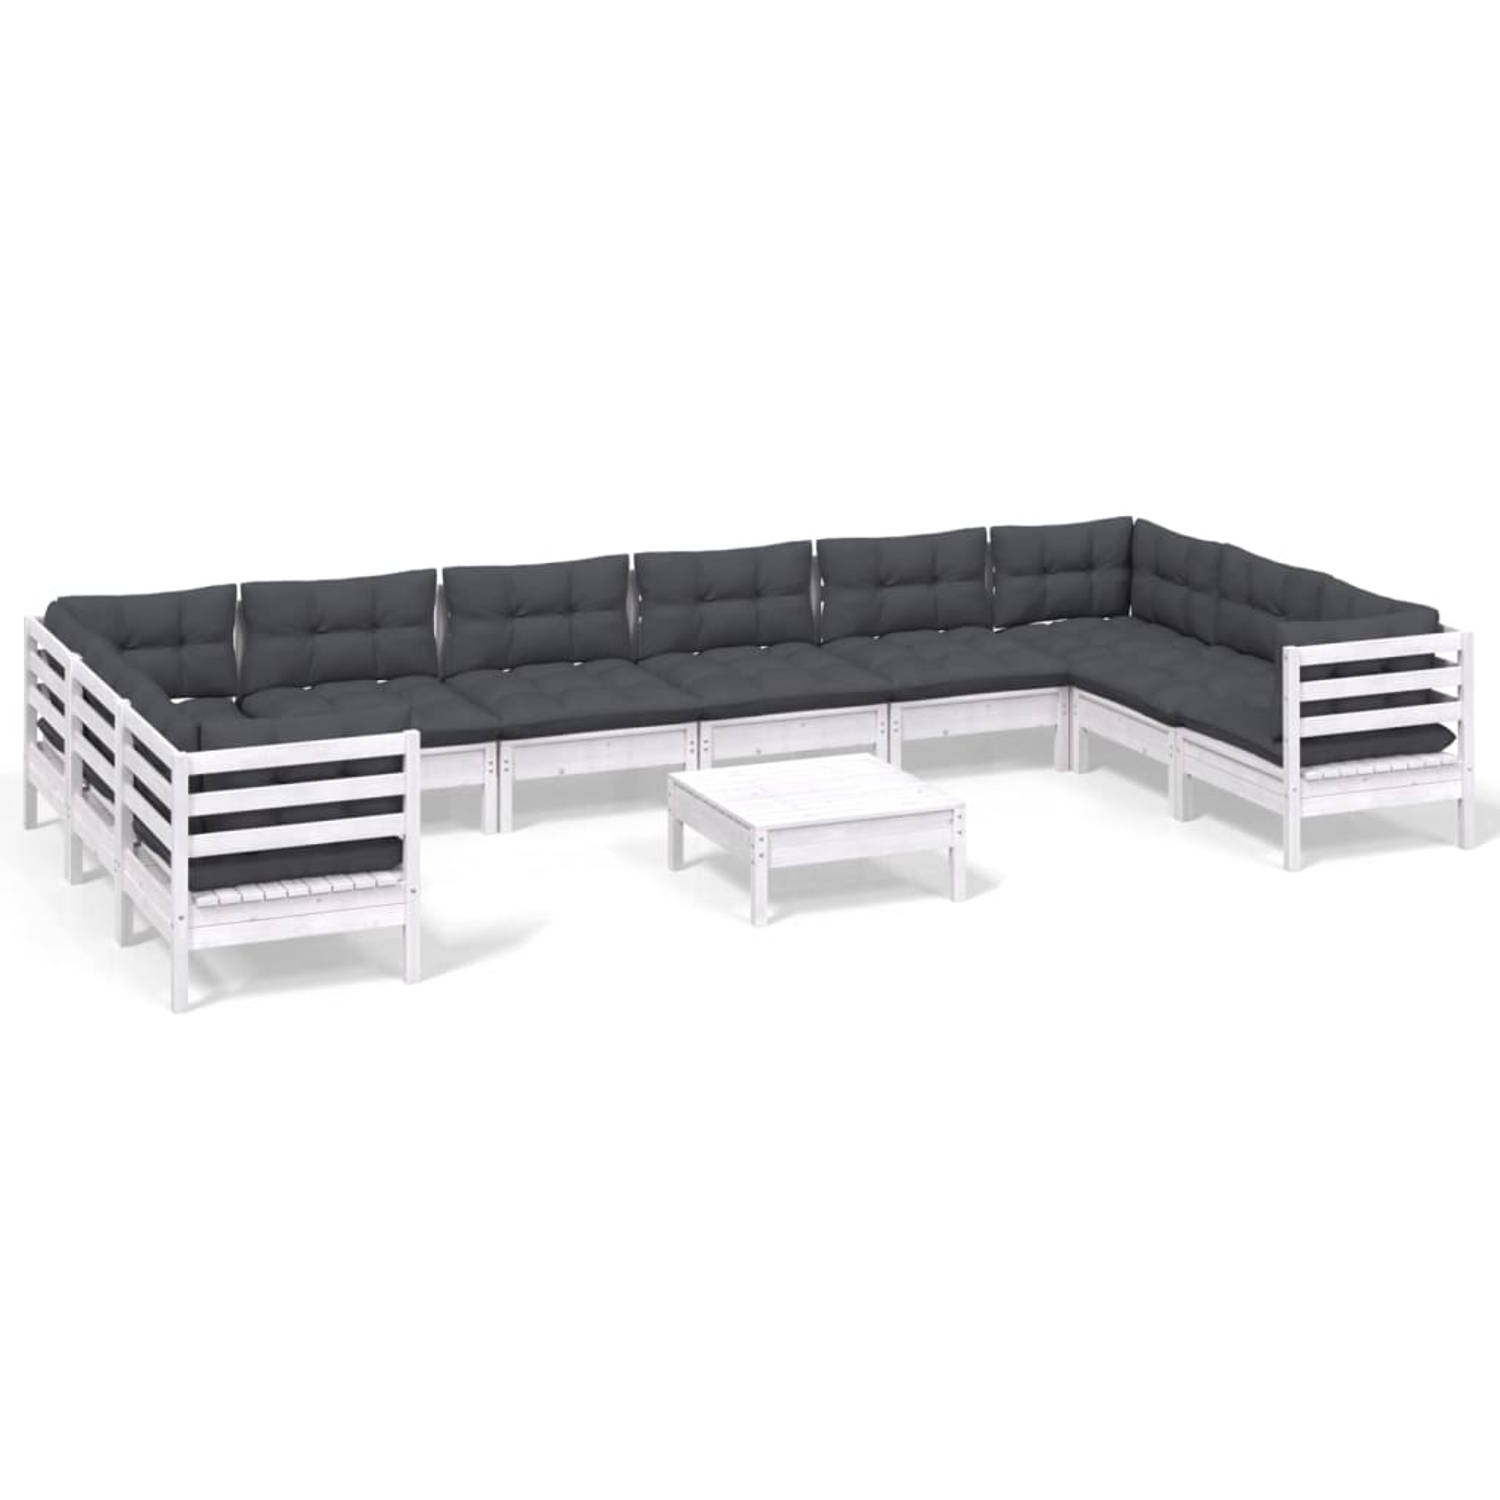 The Living Store Loungeset - Grenenhout - Wit - 63.5x63.5x62.5 cm - Inclusief kussens